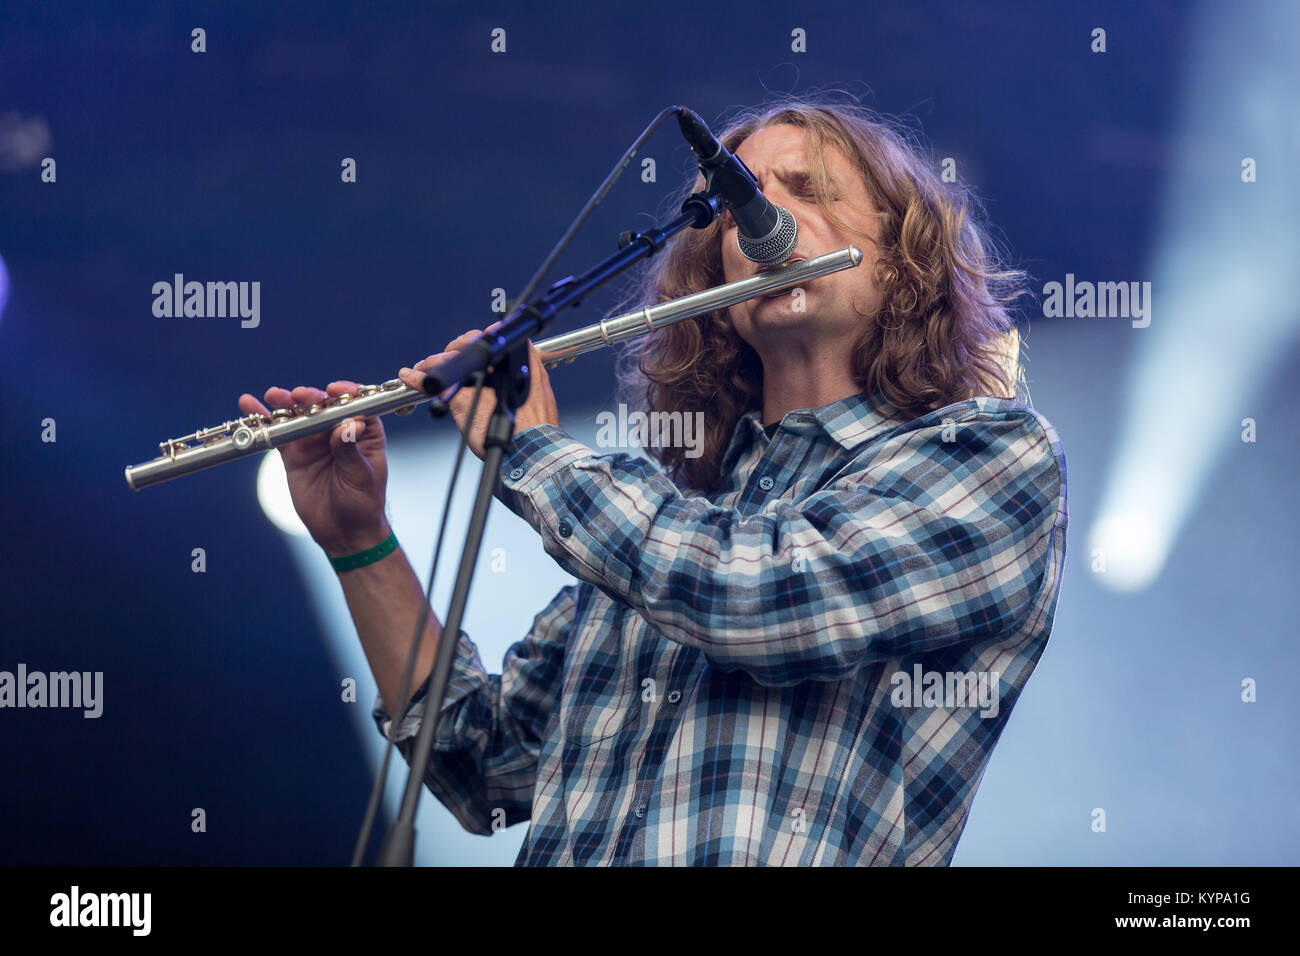 The progressive Swedish rock band Dungen performs a live concert at the  Norwegian music festival Øyafestivalen 2013. Here singer, musician and  songwriter Gustav Ejstes is pictured live on stage. Norway, 08/08 2013